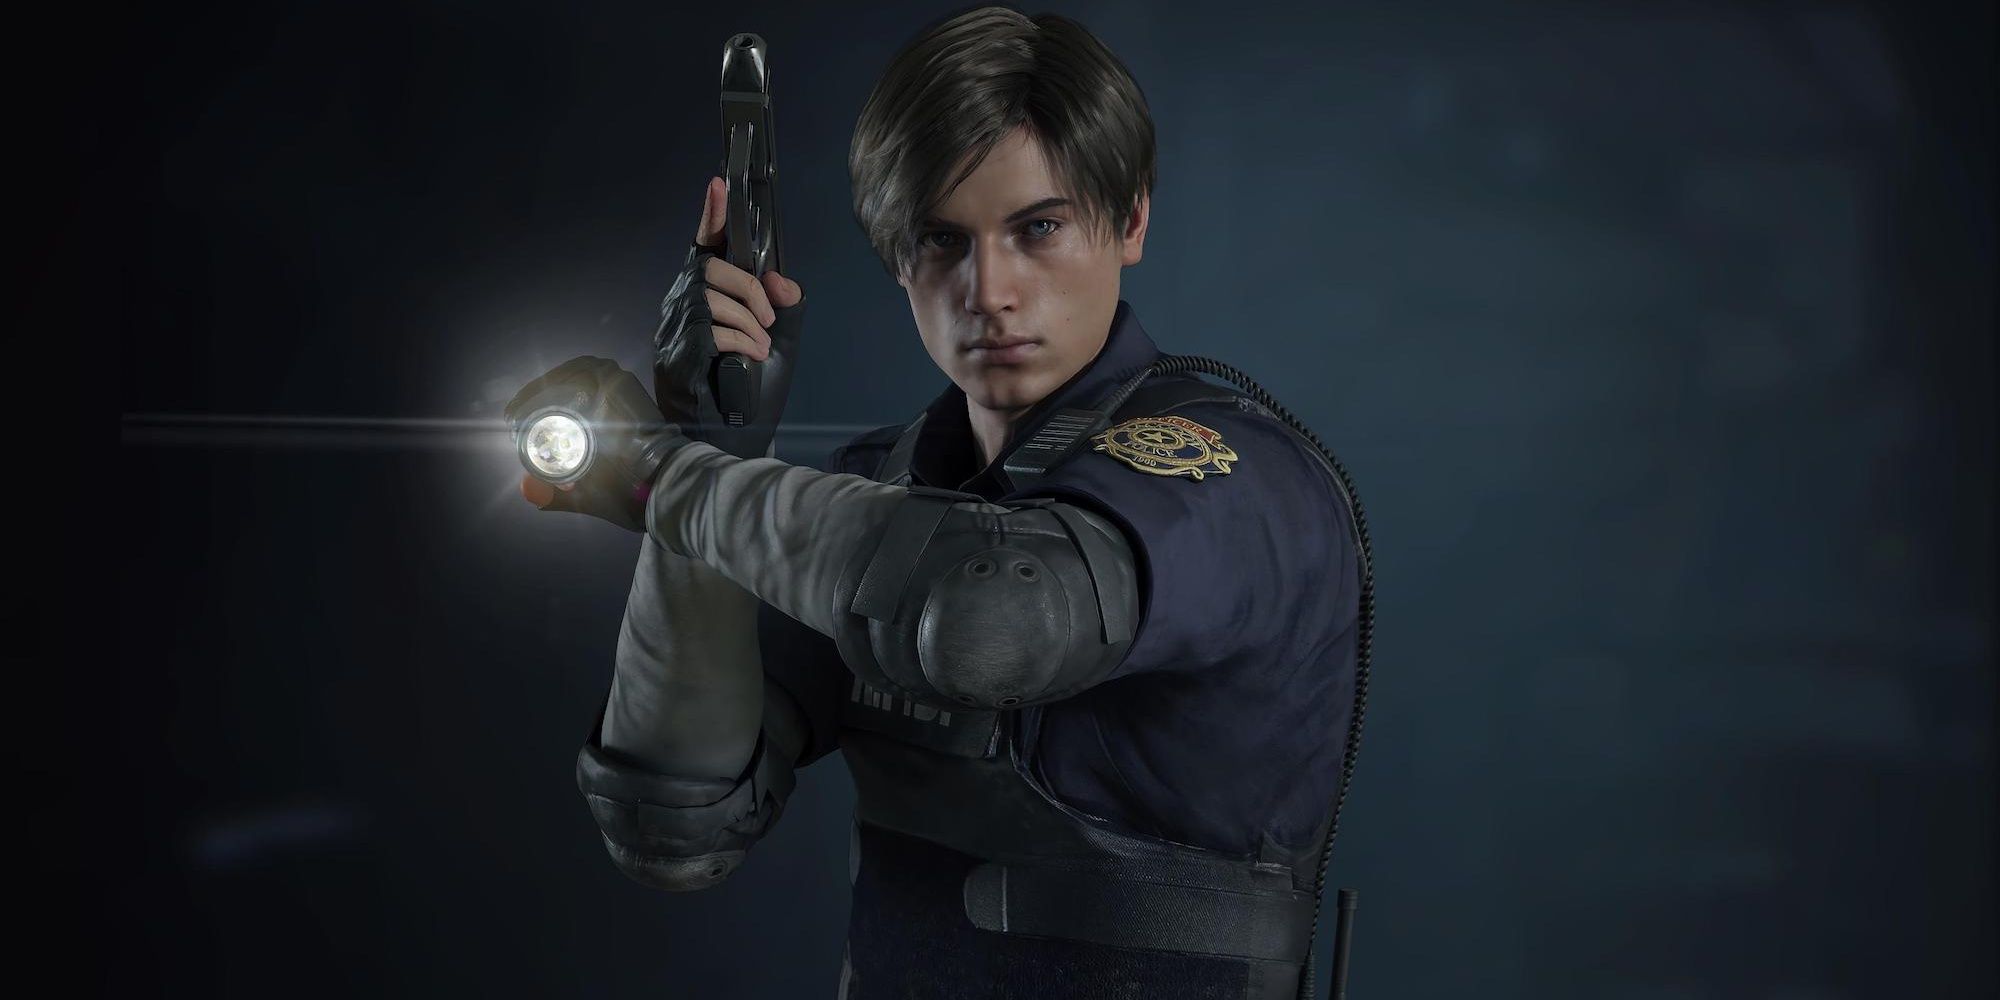 Leon Kennedy equipped with his flashlight and pistol in Resident Evil 2